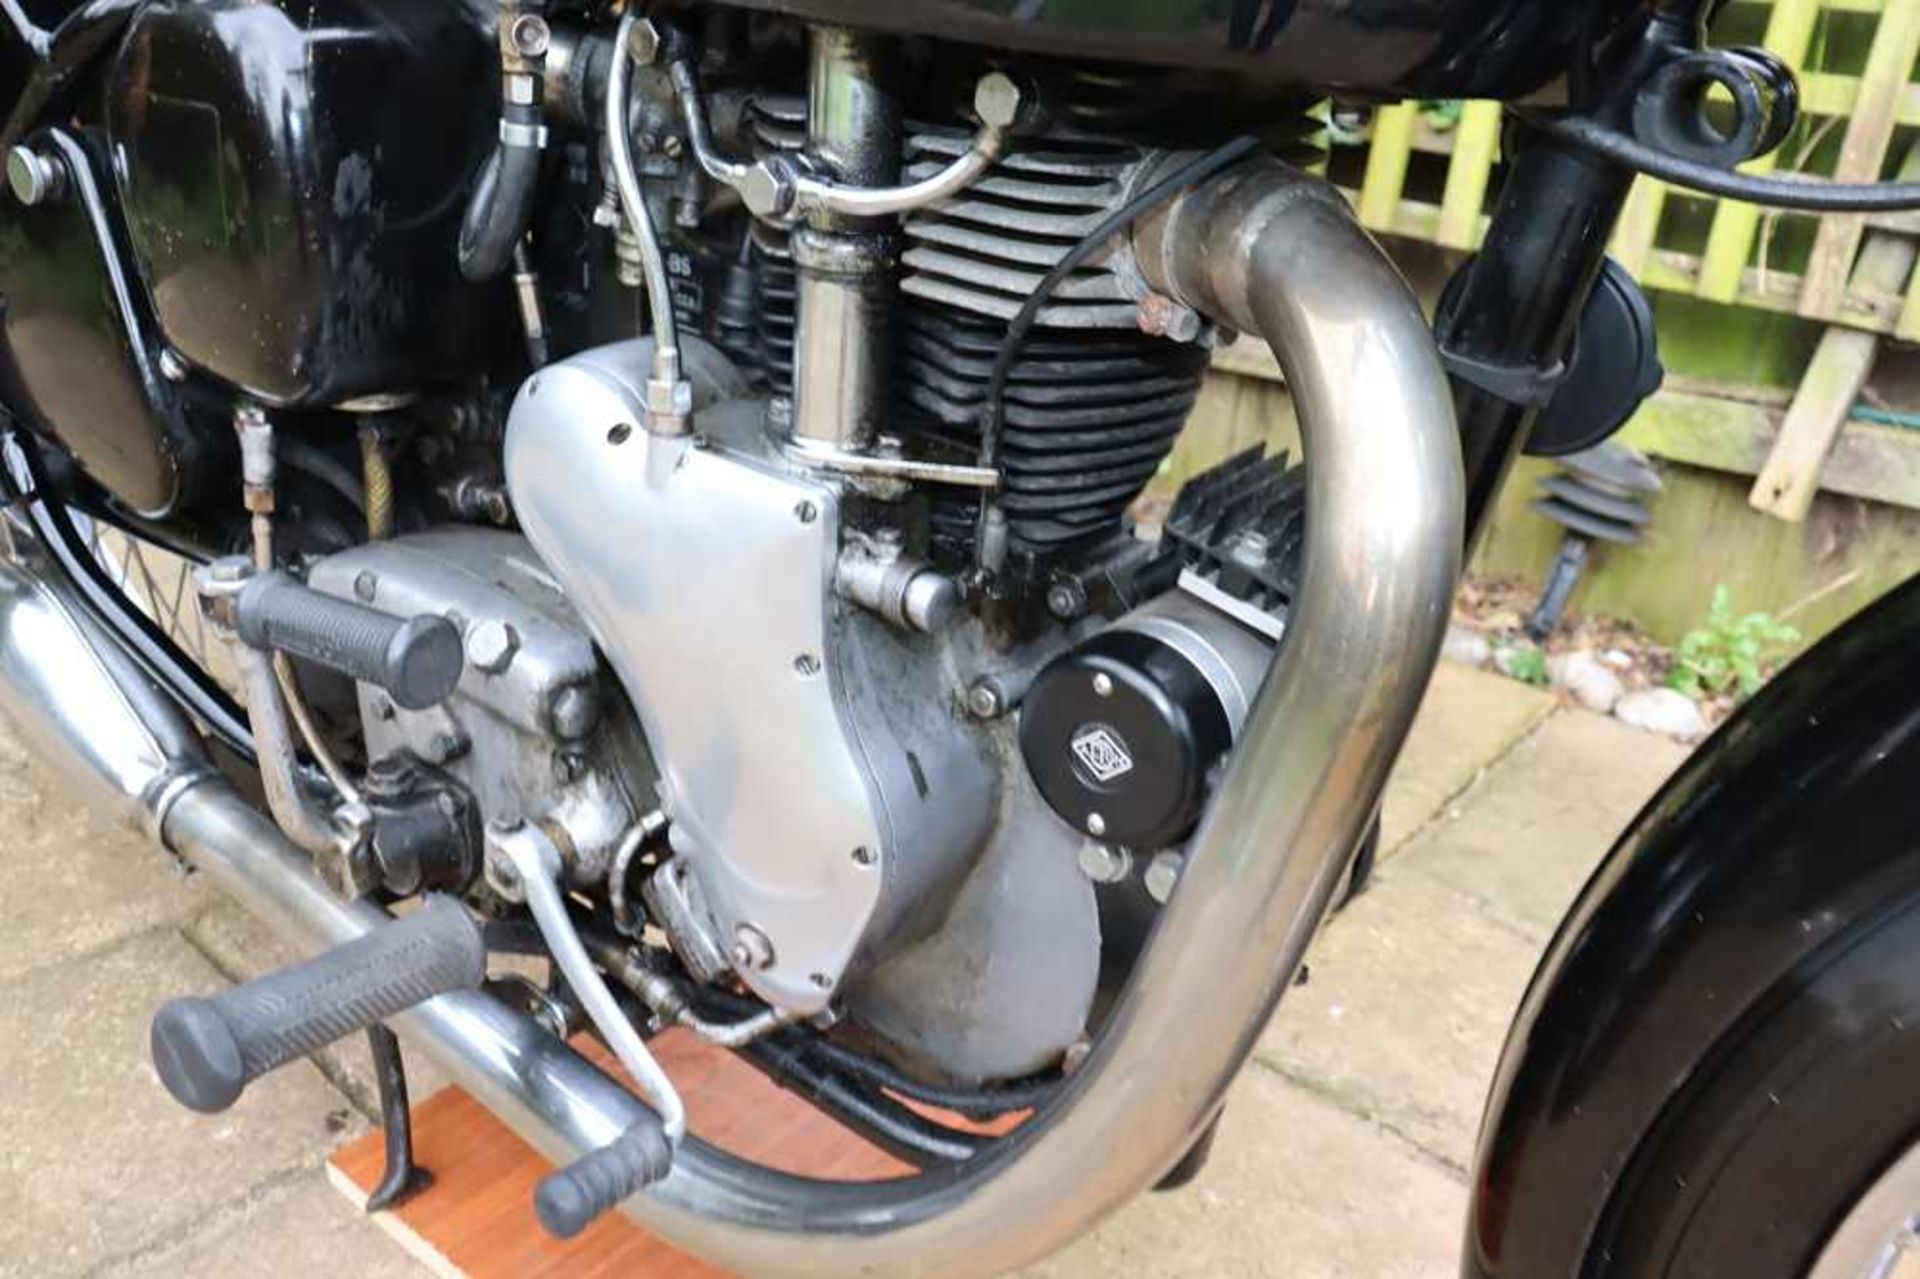 1954 Velocette MSS Fitted with an Alton electric starter kit - Image 25 of 41